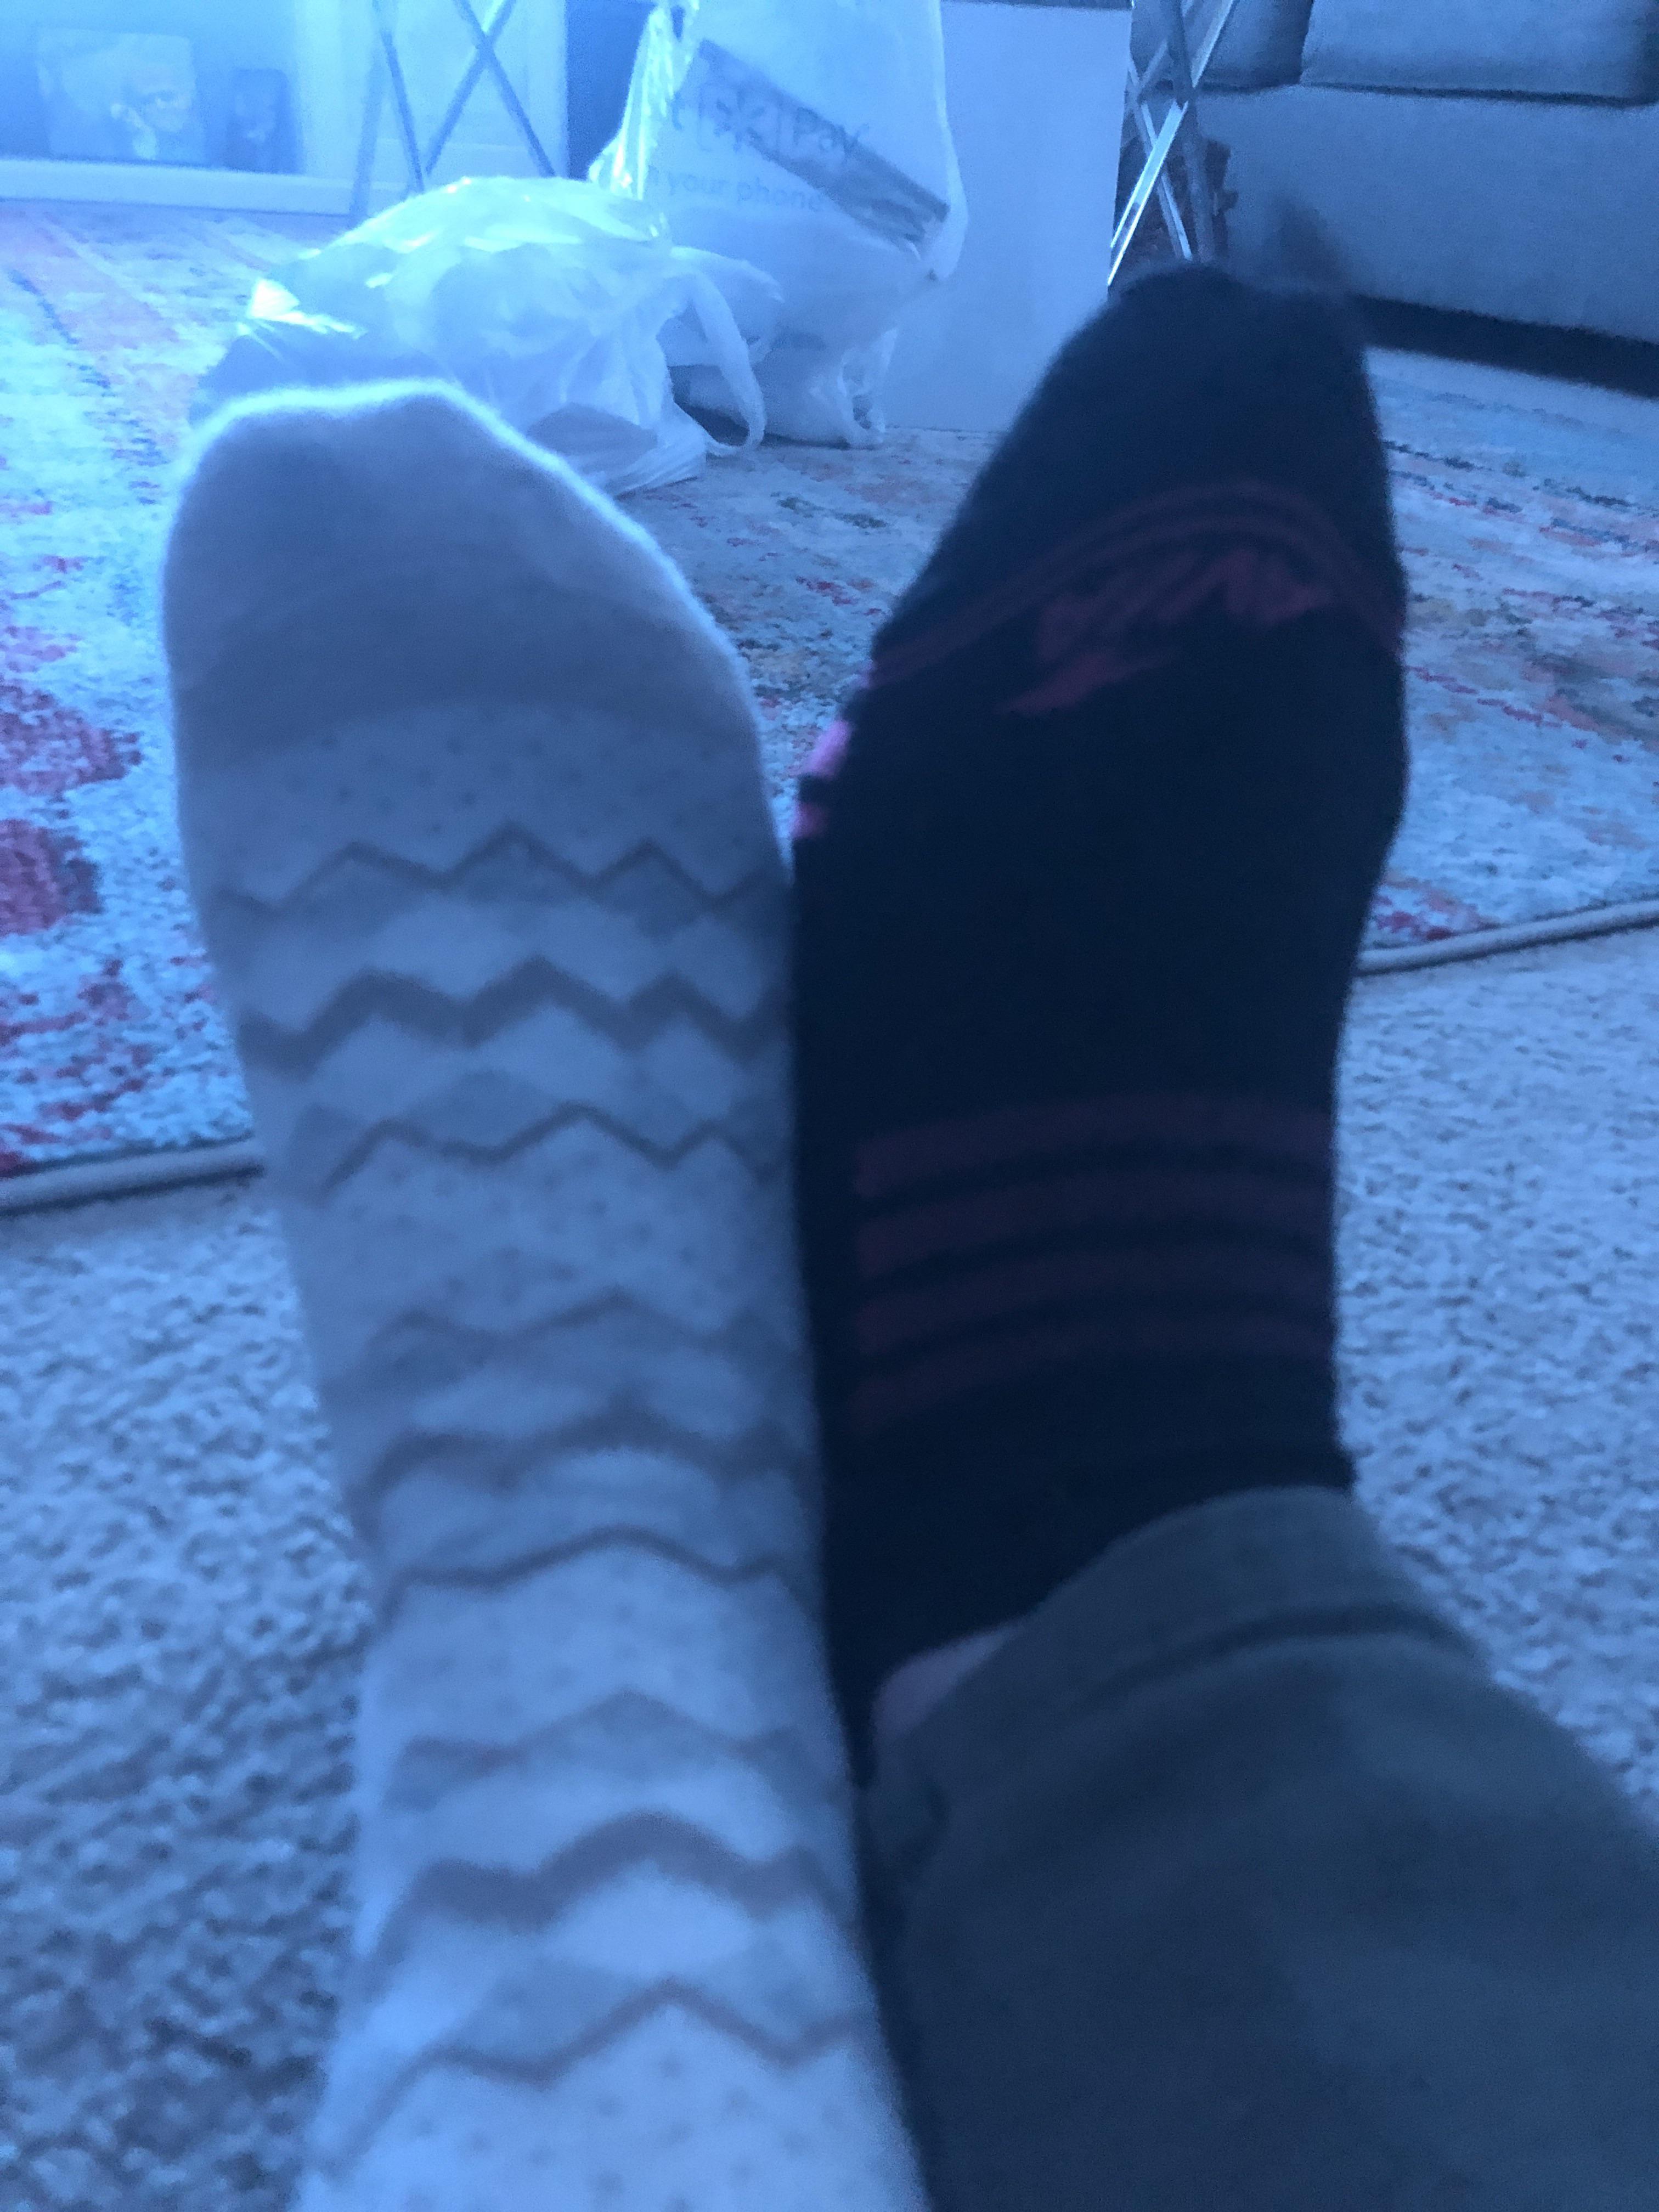 Chillin with my friends 😉 her feet are bigger than mine 👉🏻👈🏻🥺 | Scrolller